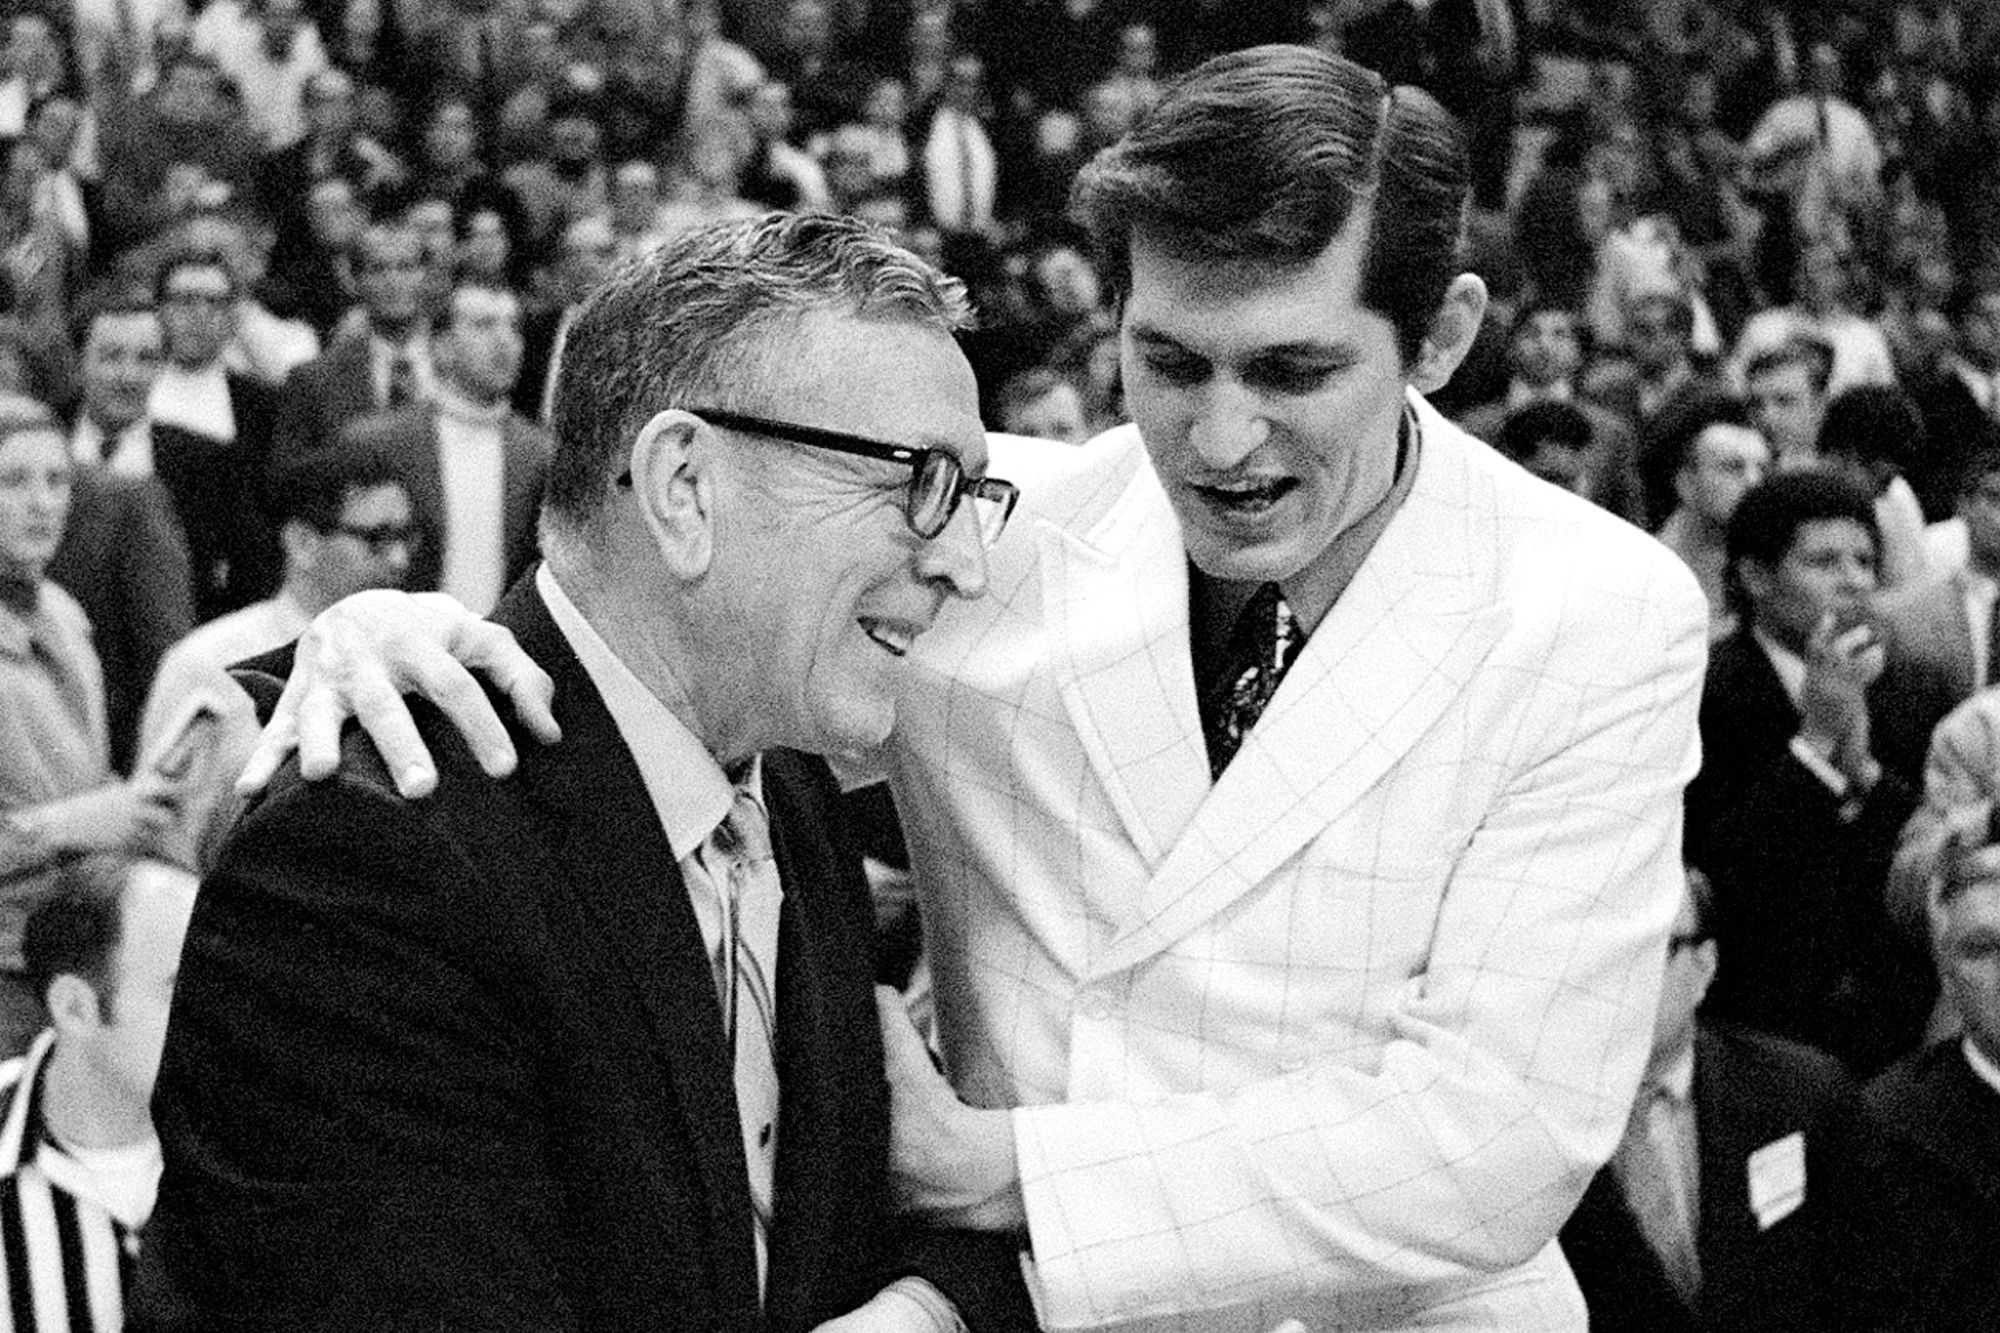 Joe Williams, coached Jacksonville to NCAA title game, dies at 88